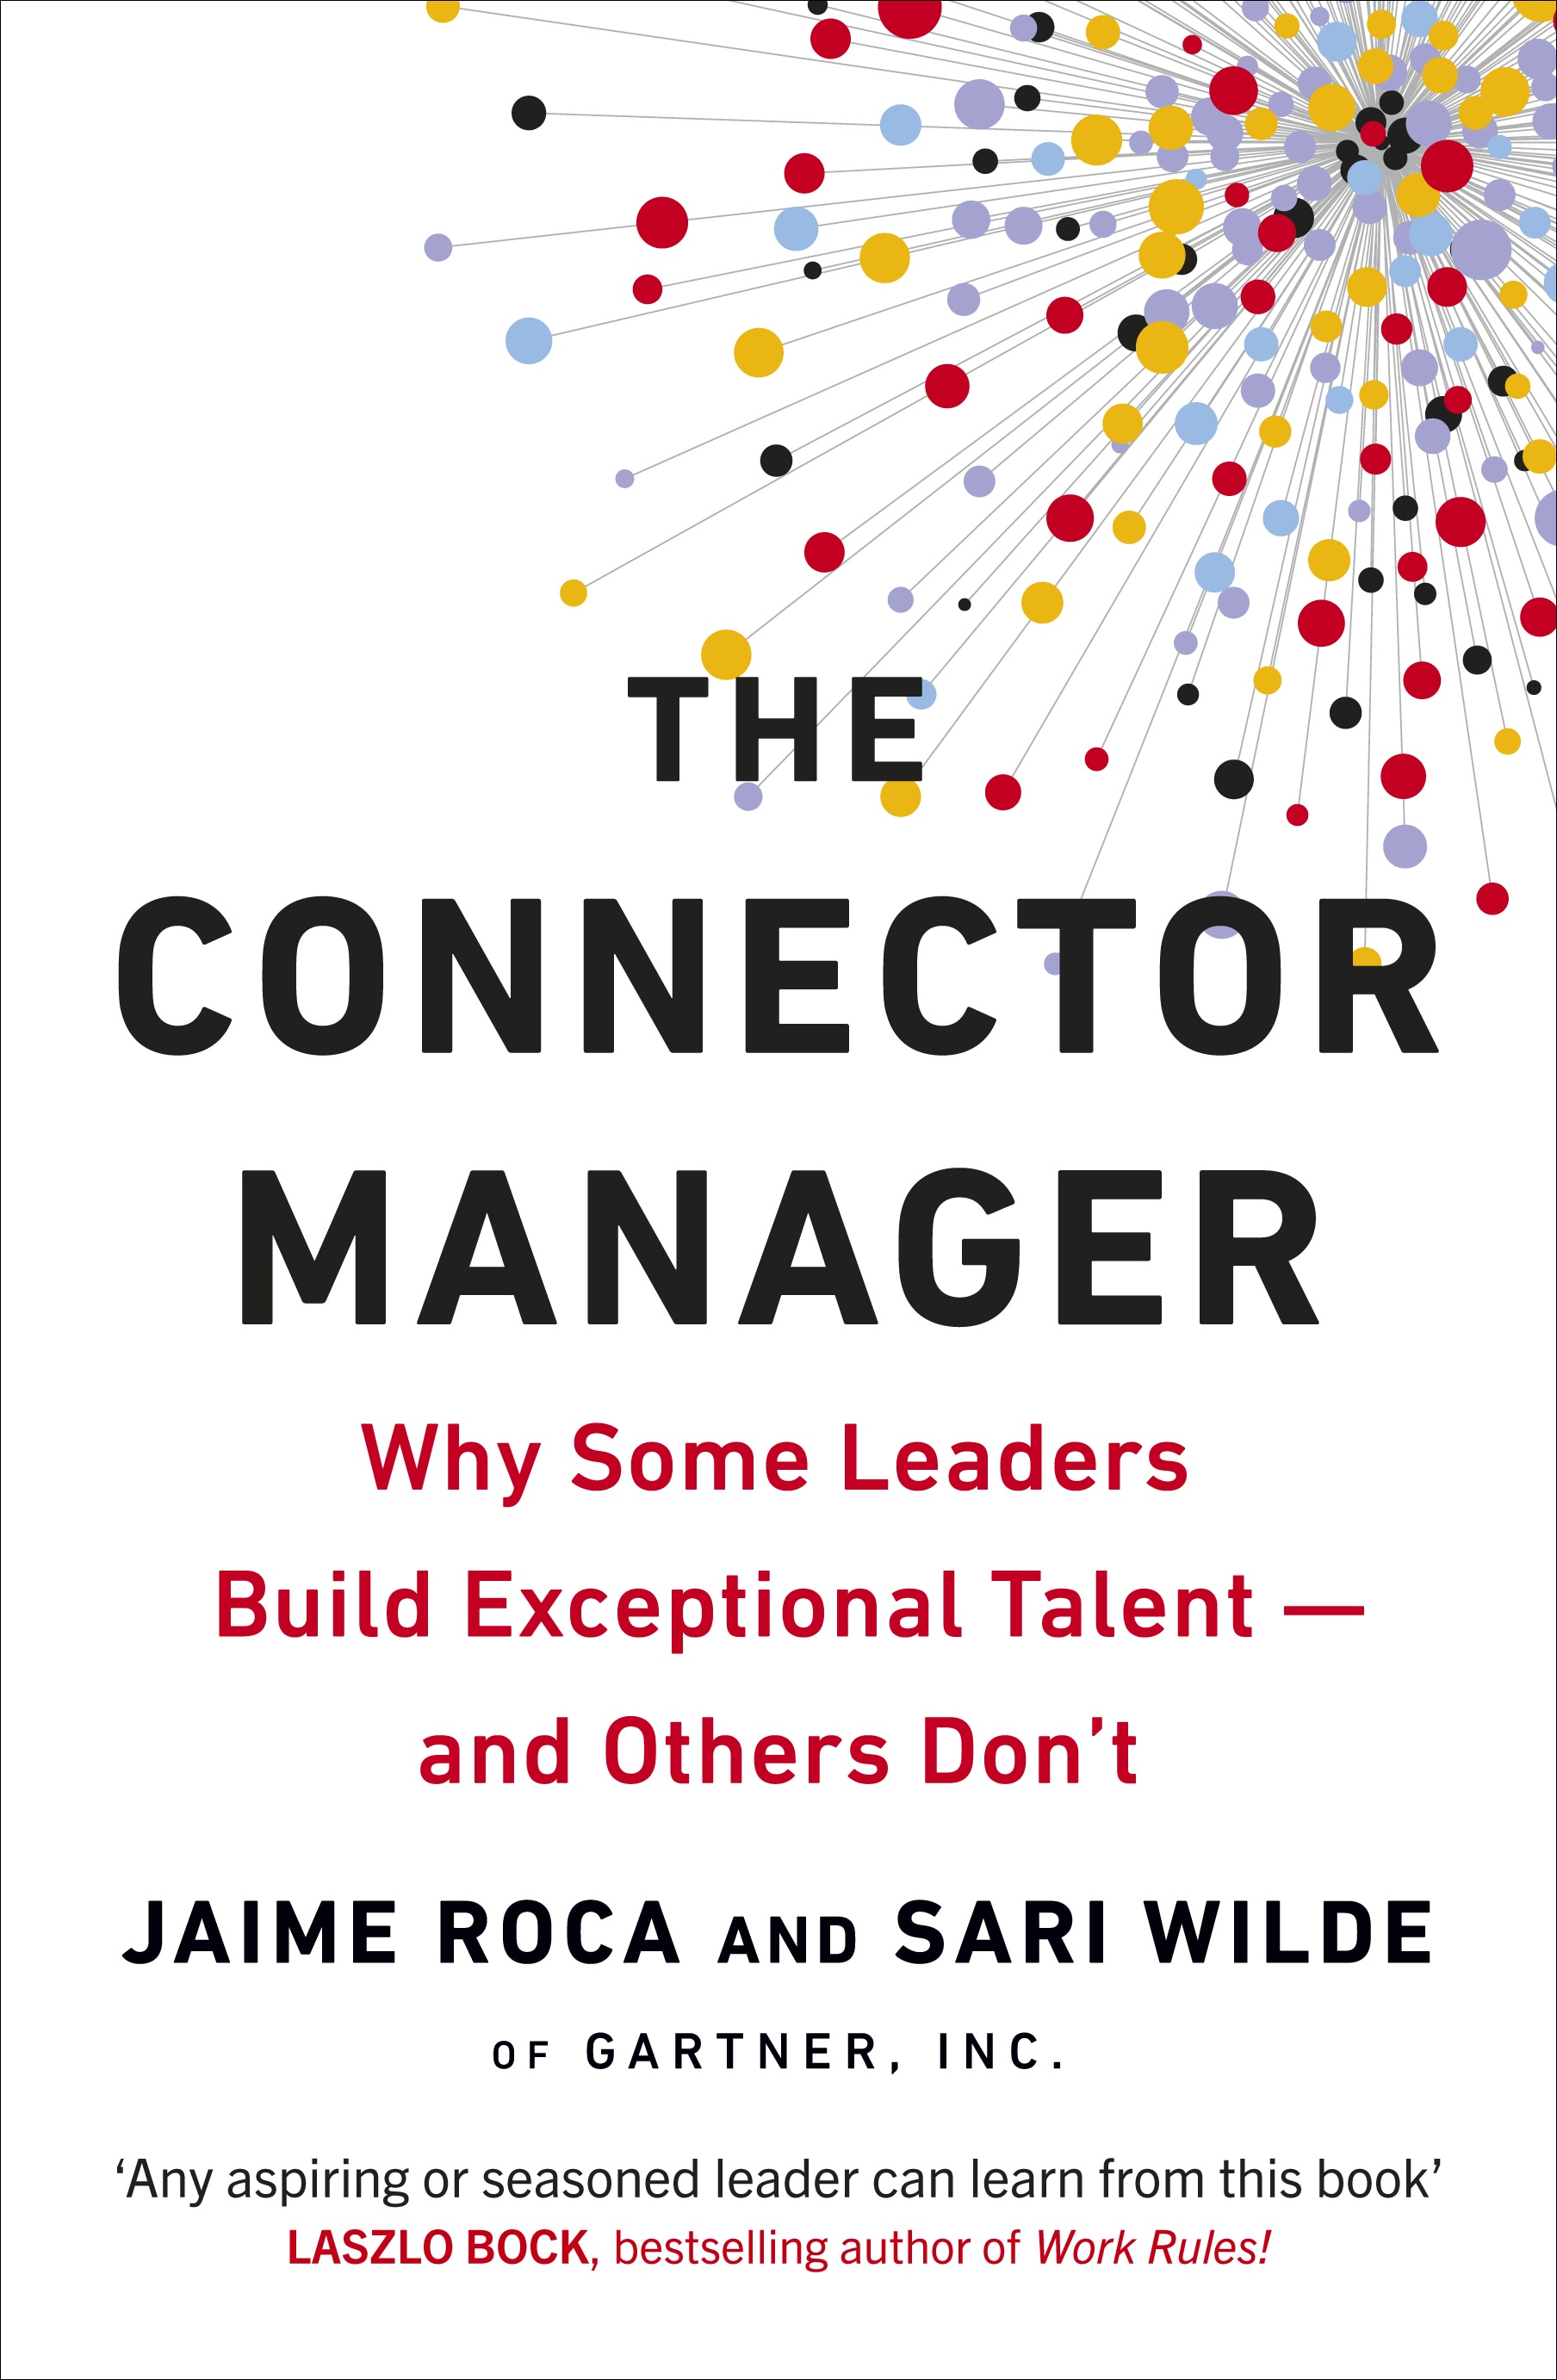 Book “The Connector Manager” by Jaime Roca, Sari Wilde — September 19, 2019